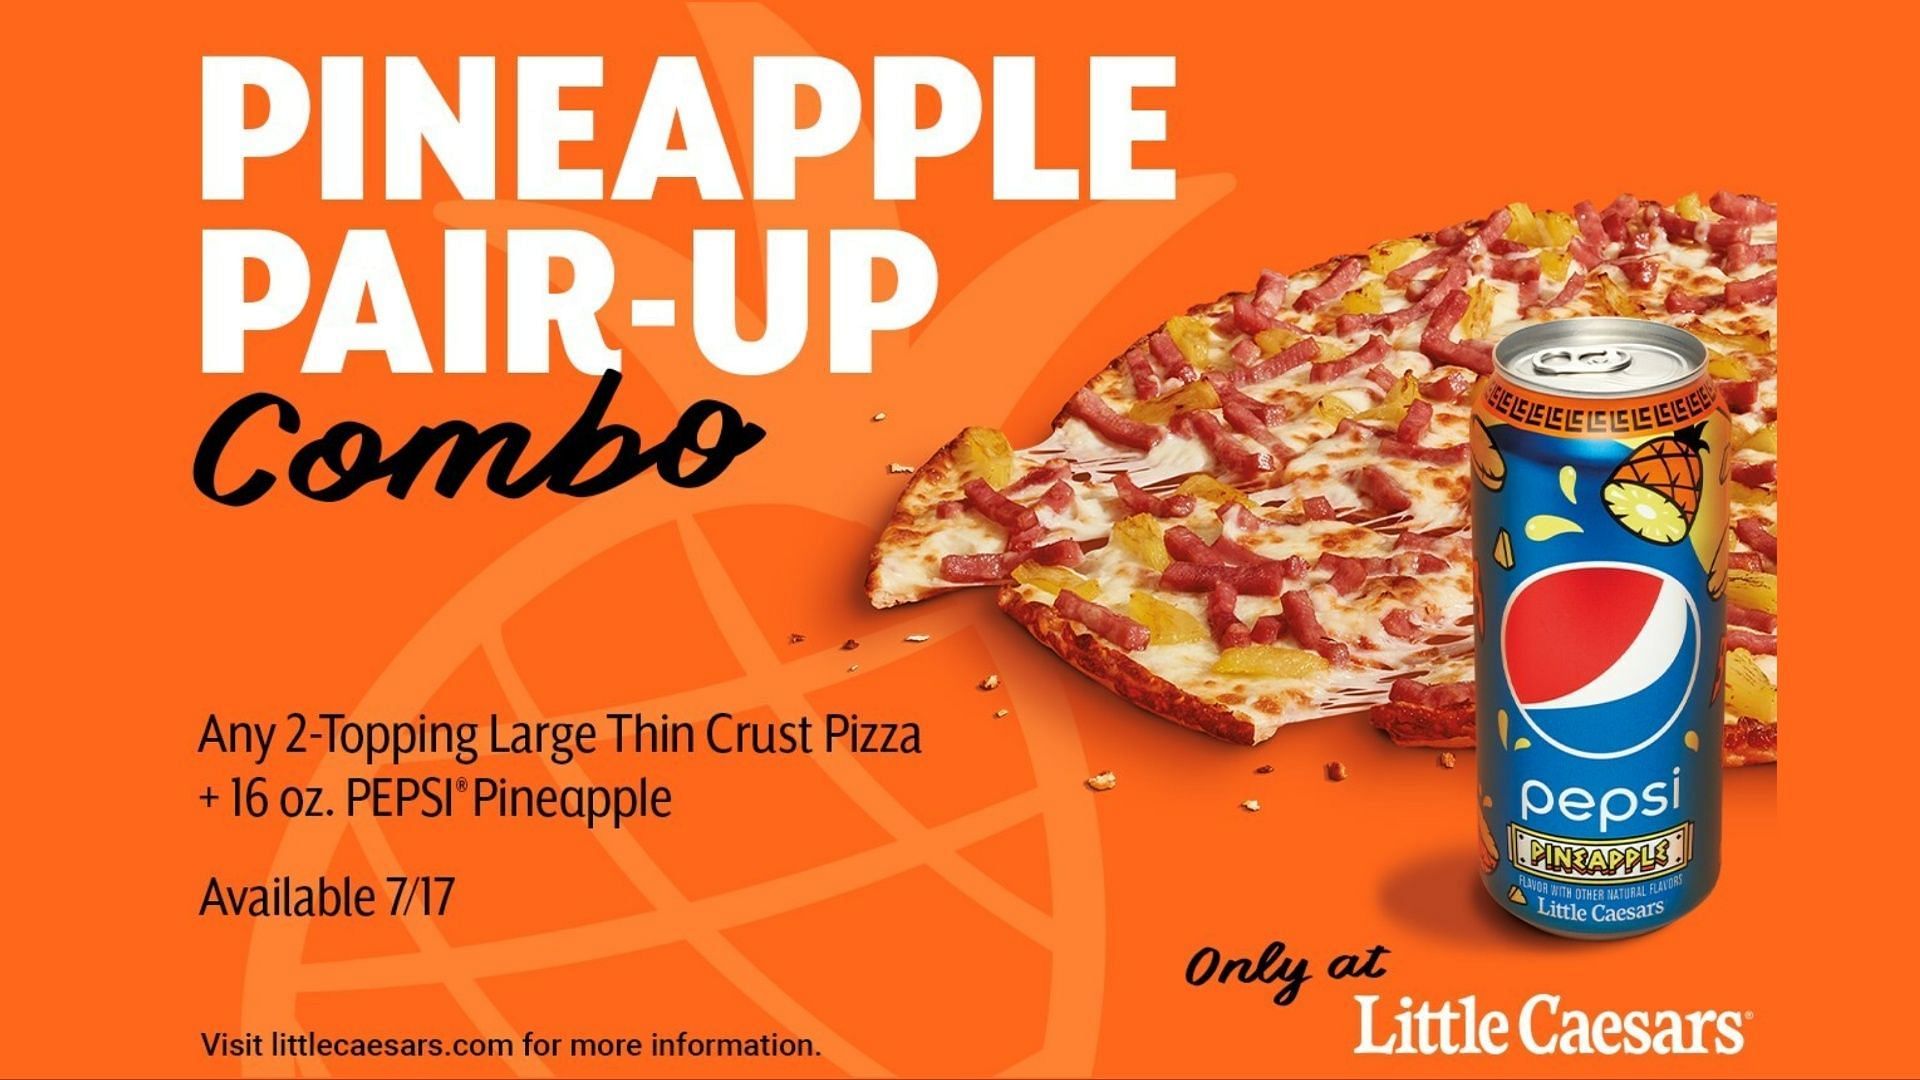 Pineapple Pepsie will exclusively be available at Little Caesars with the Pineapple Pair-Up Combo that comes for over $9.99 (Image via Pepsi / Little Caesars)